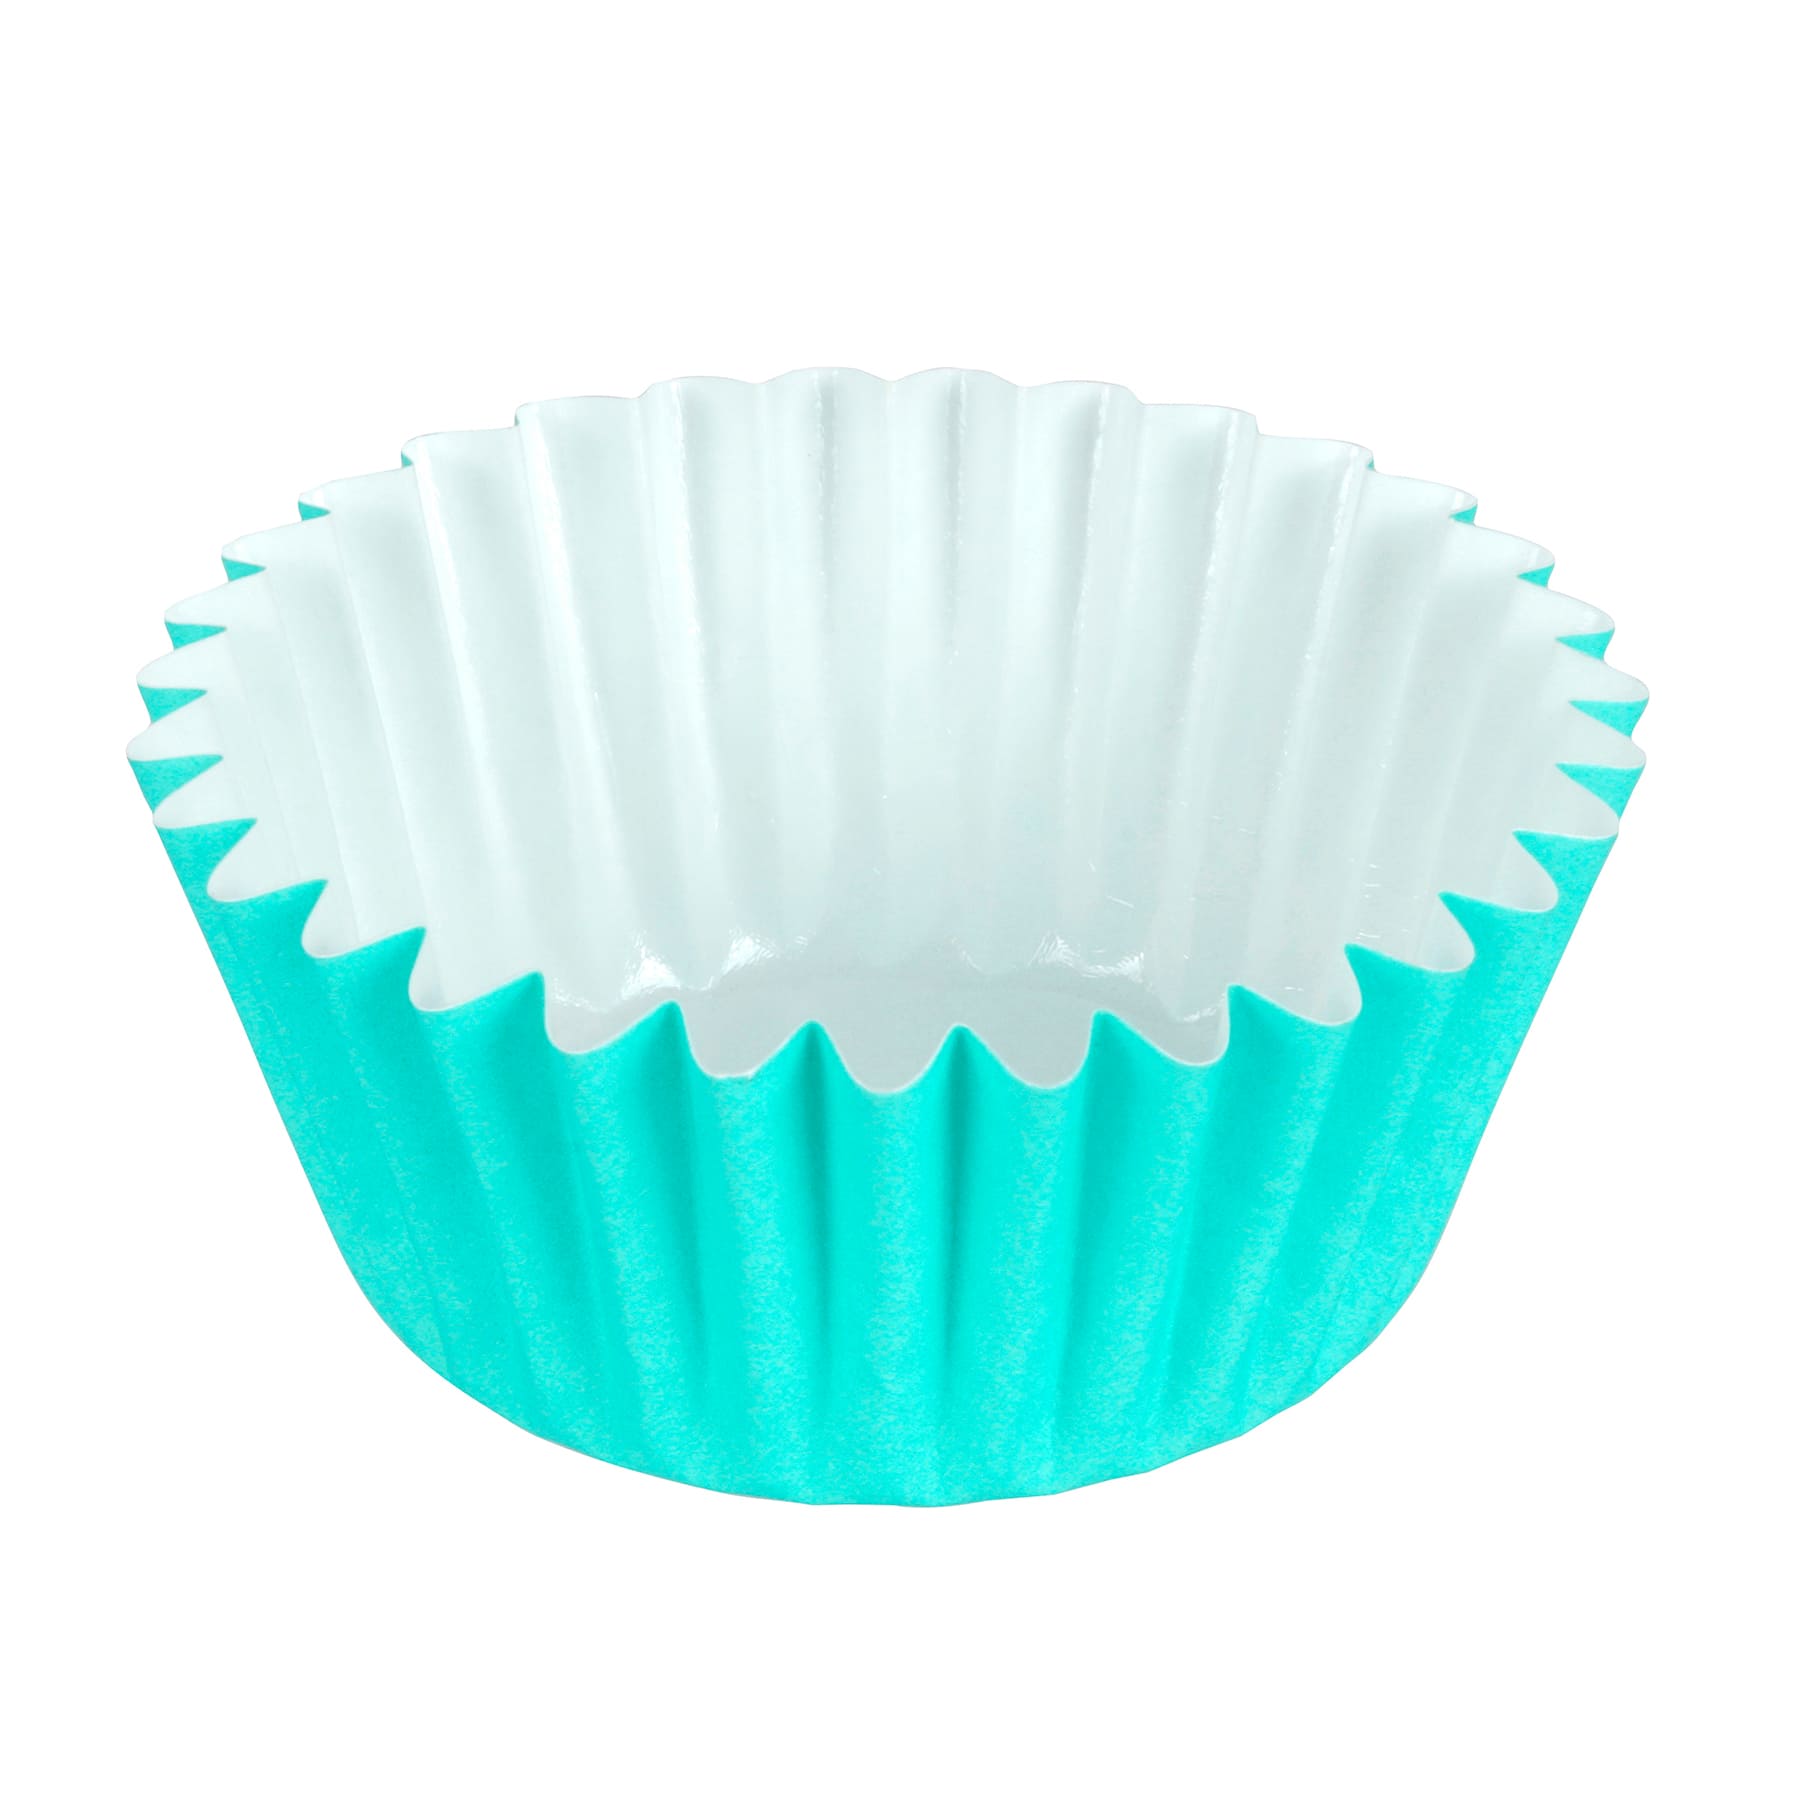 Dot Teal Cupcake Liners | Teal Dot Greaseproof Baking Cups - 36 count pack